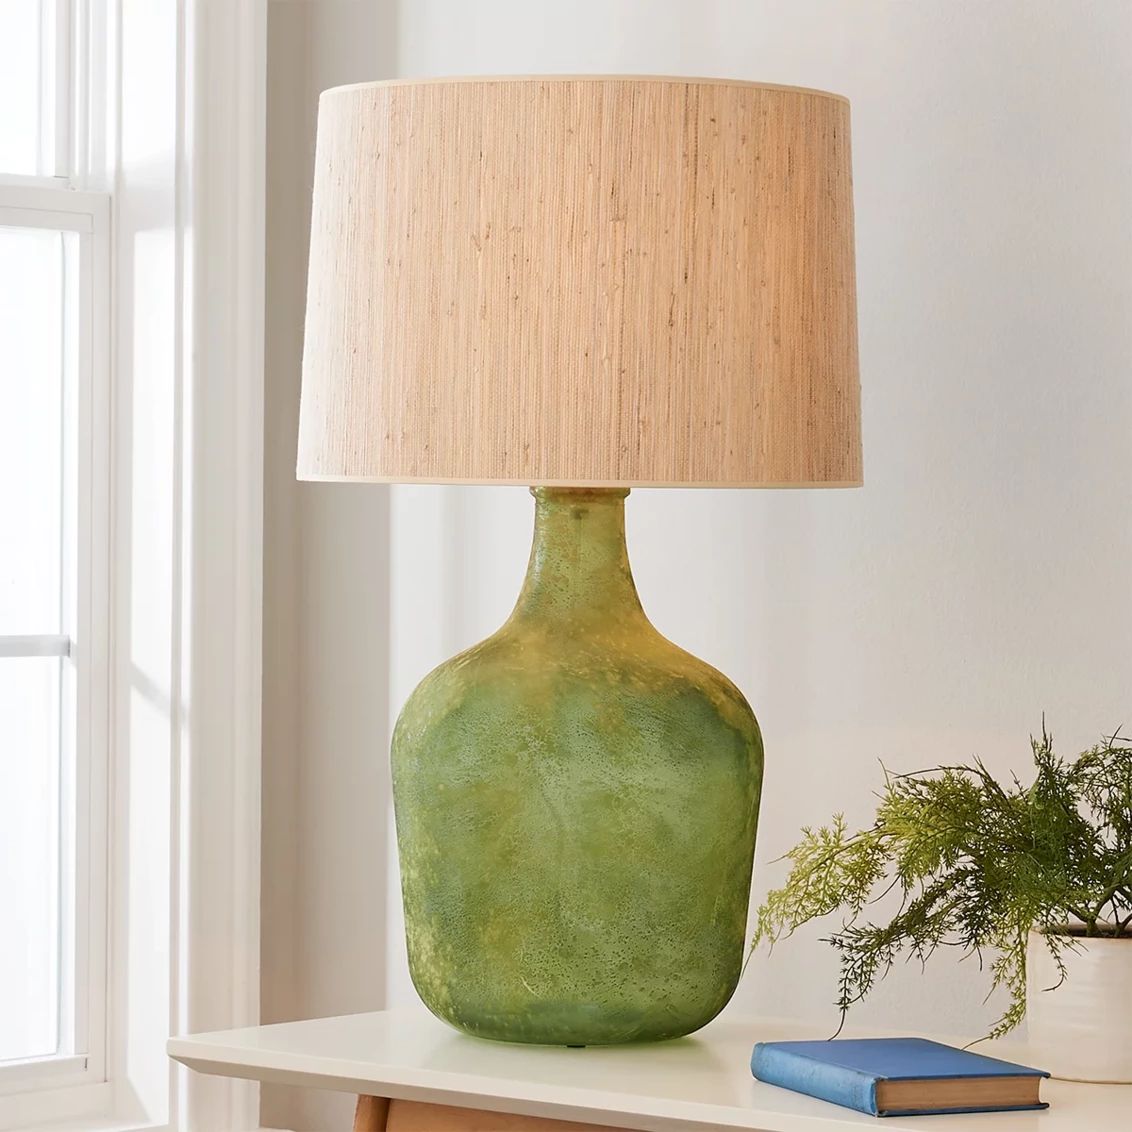 Flagon Table Lamp | Shades of Light